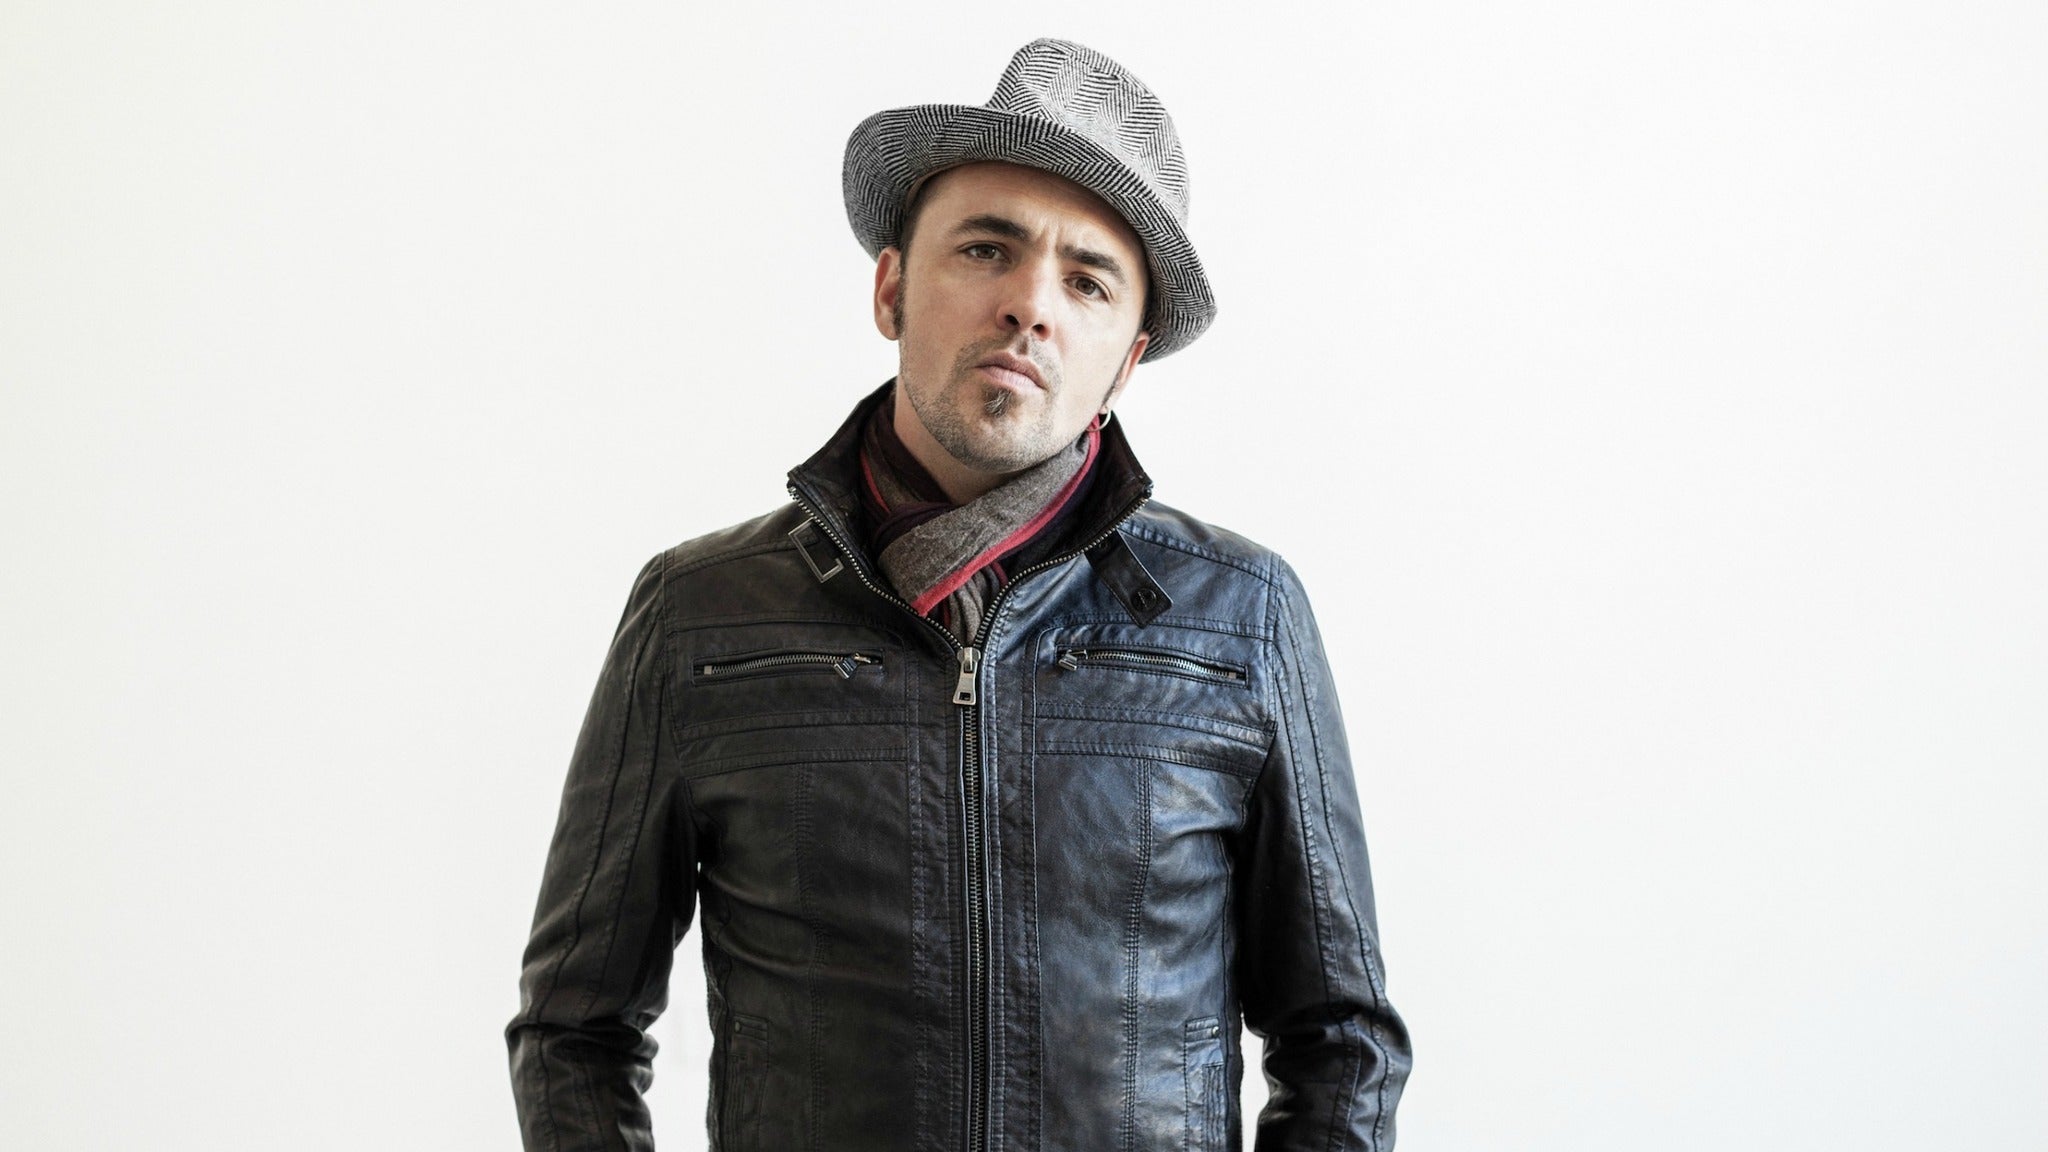 Hawksley Workman: Almost a Full Moon - The Merry Christmas Show presale password for show tickets in Toronto, ON (The Danforth Music Hall)